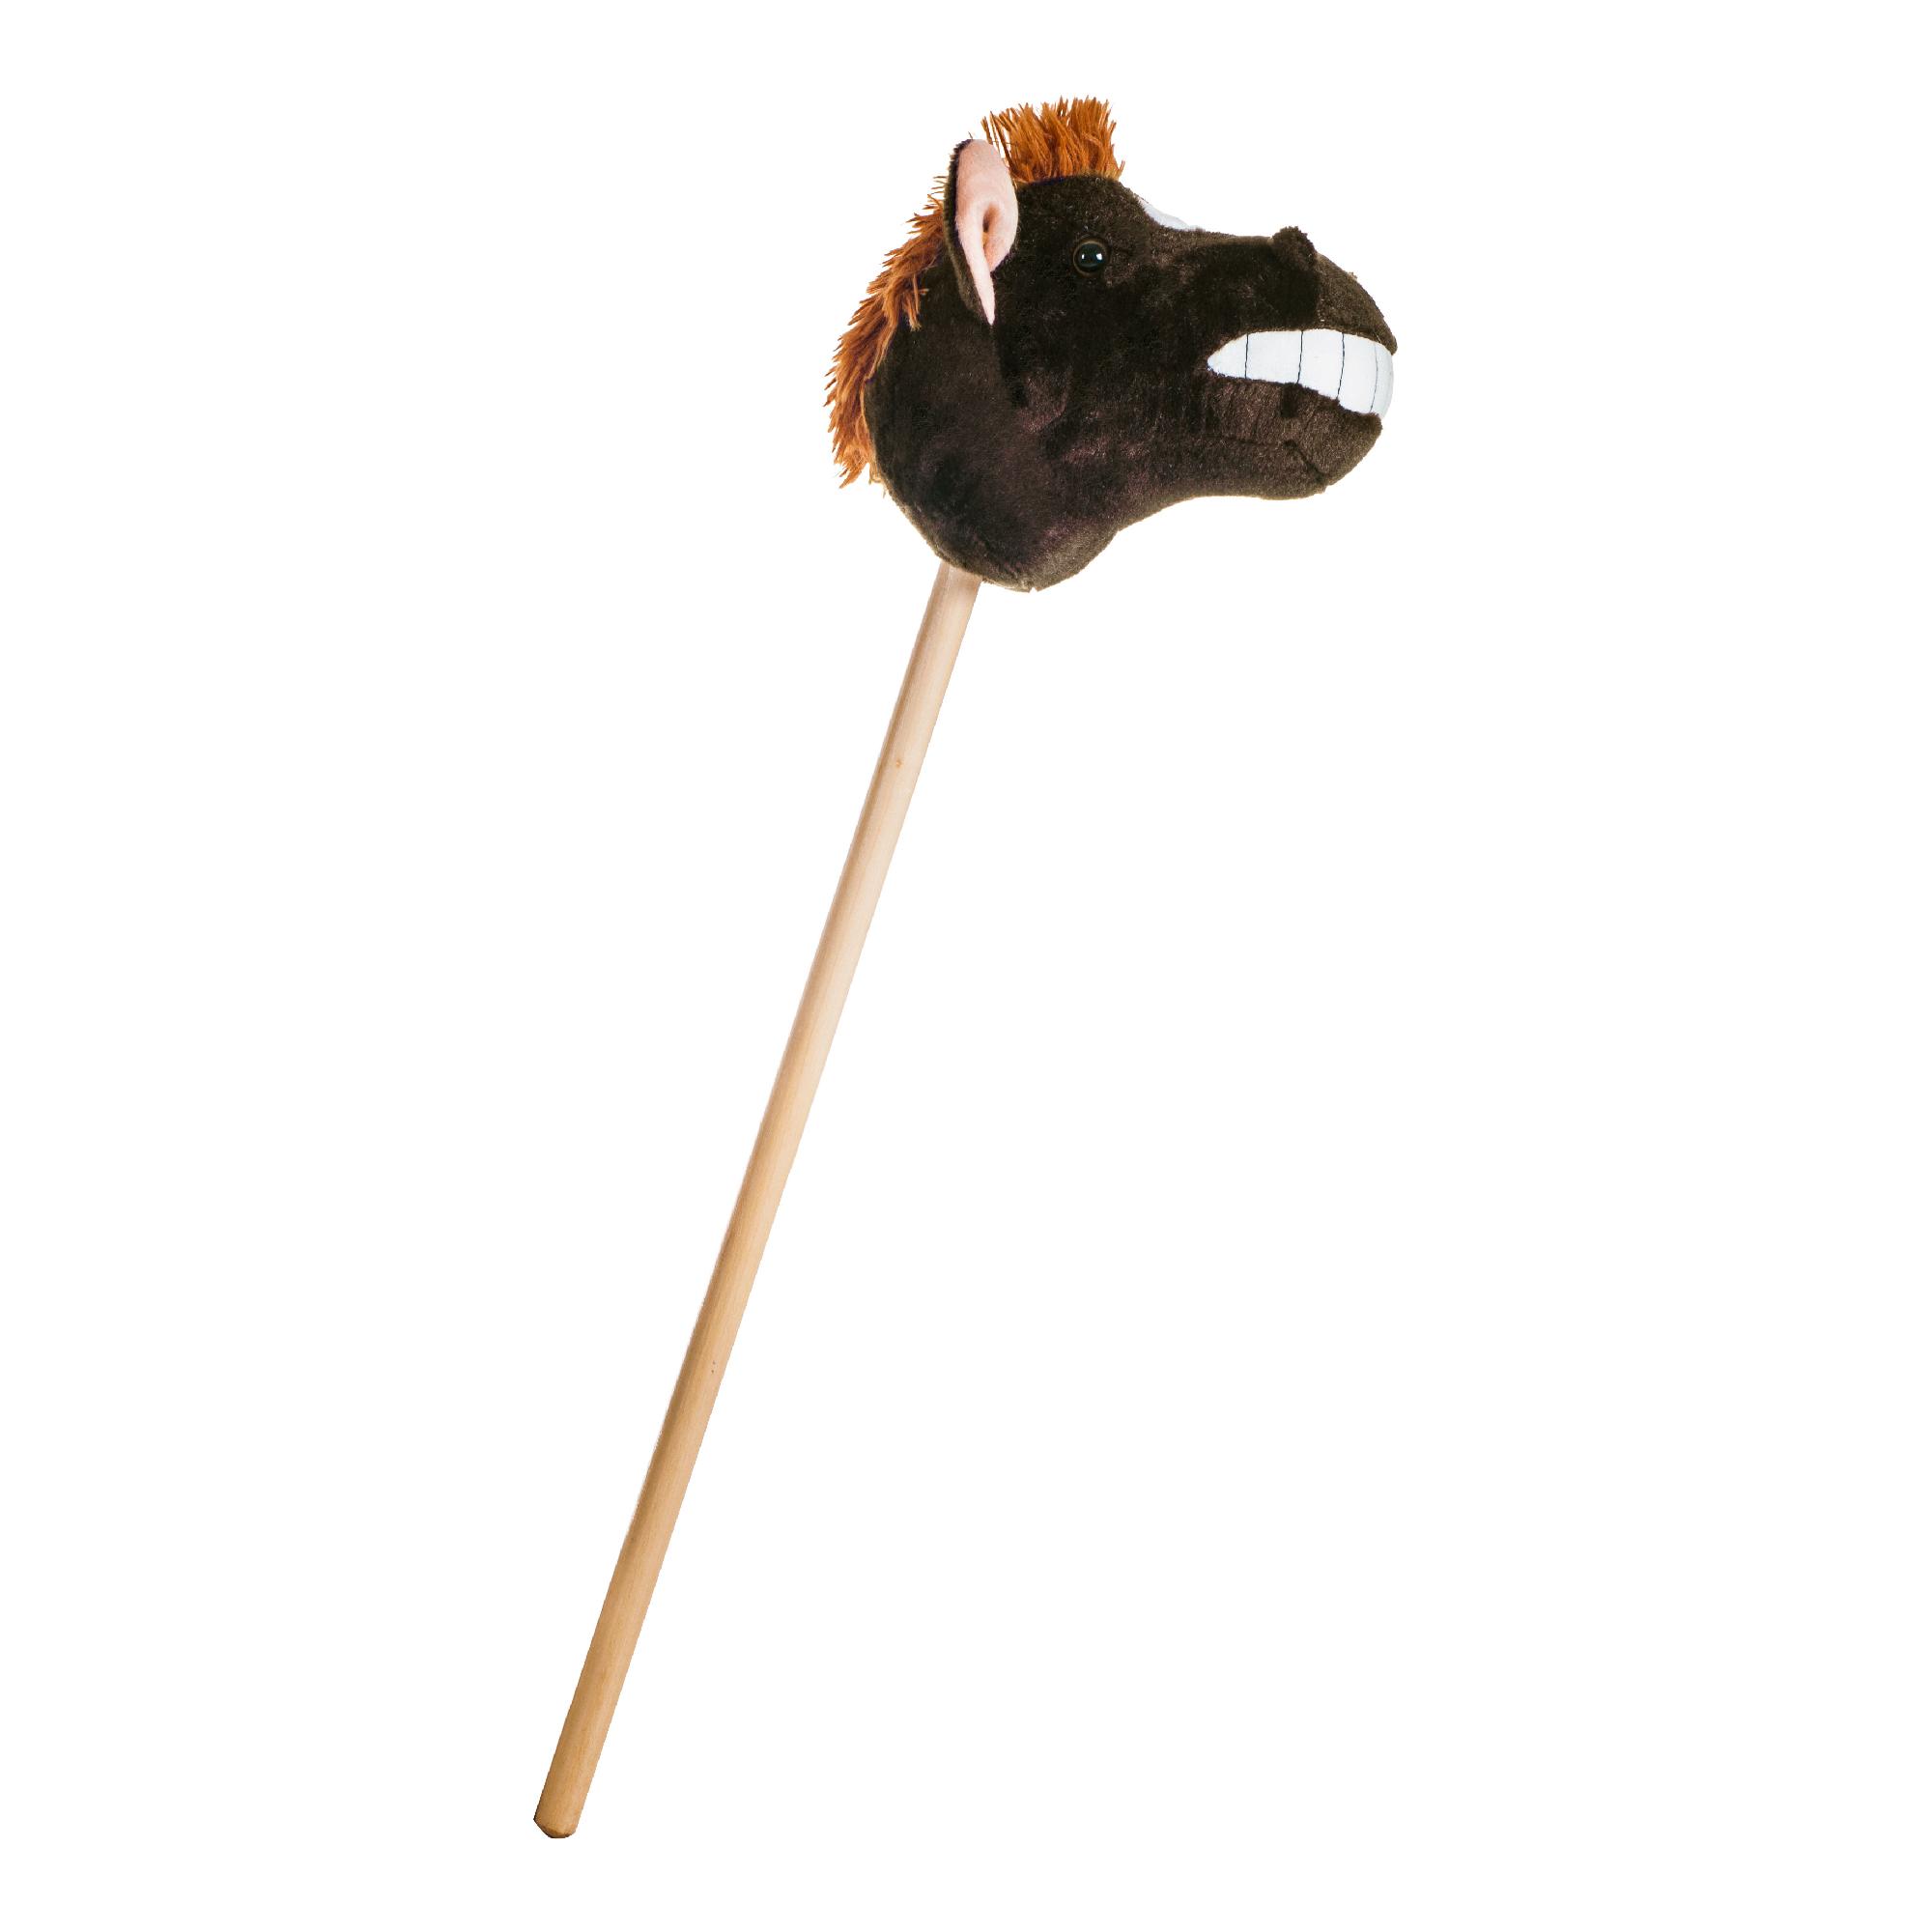 Henry the Horse Stick - Happy Trails Stick Horse Animals